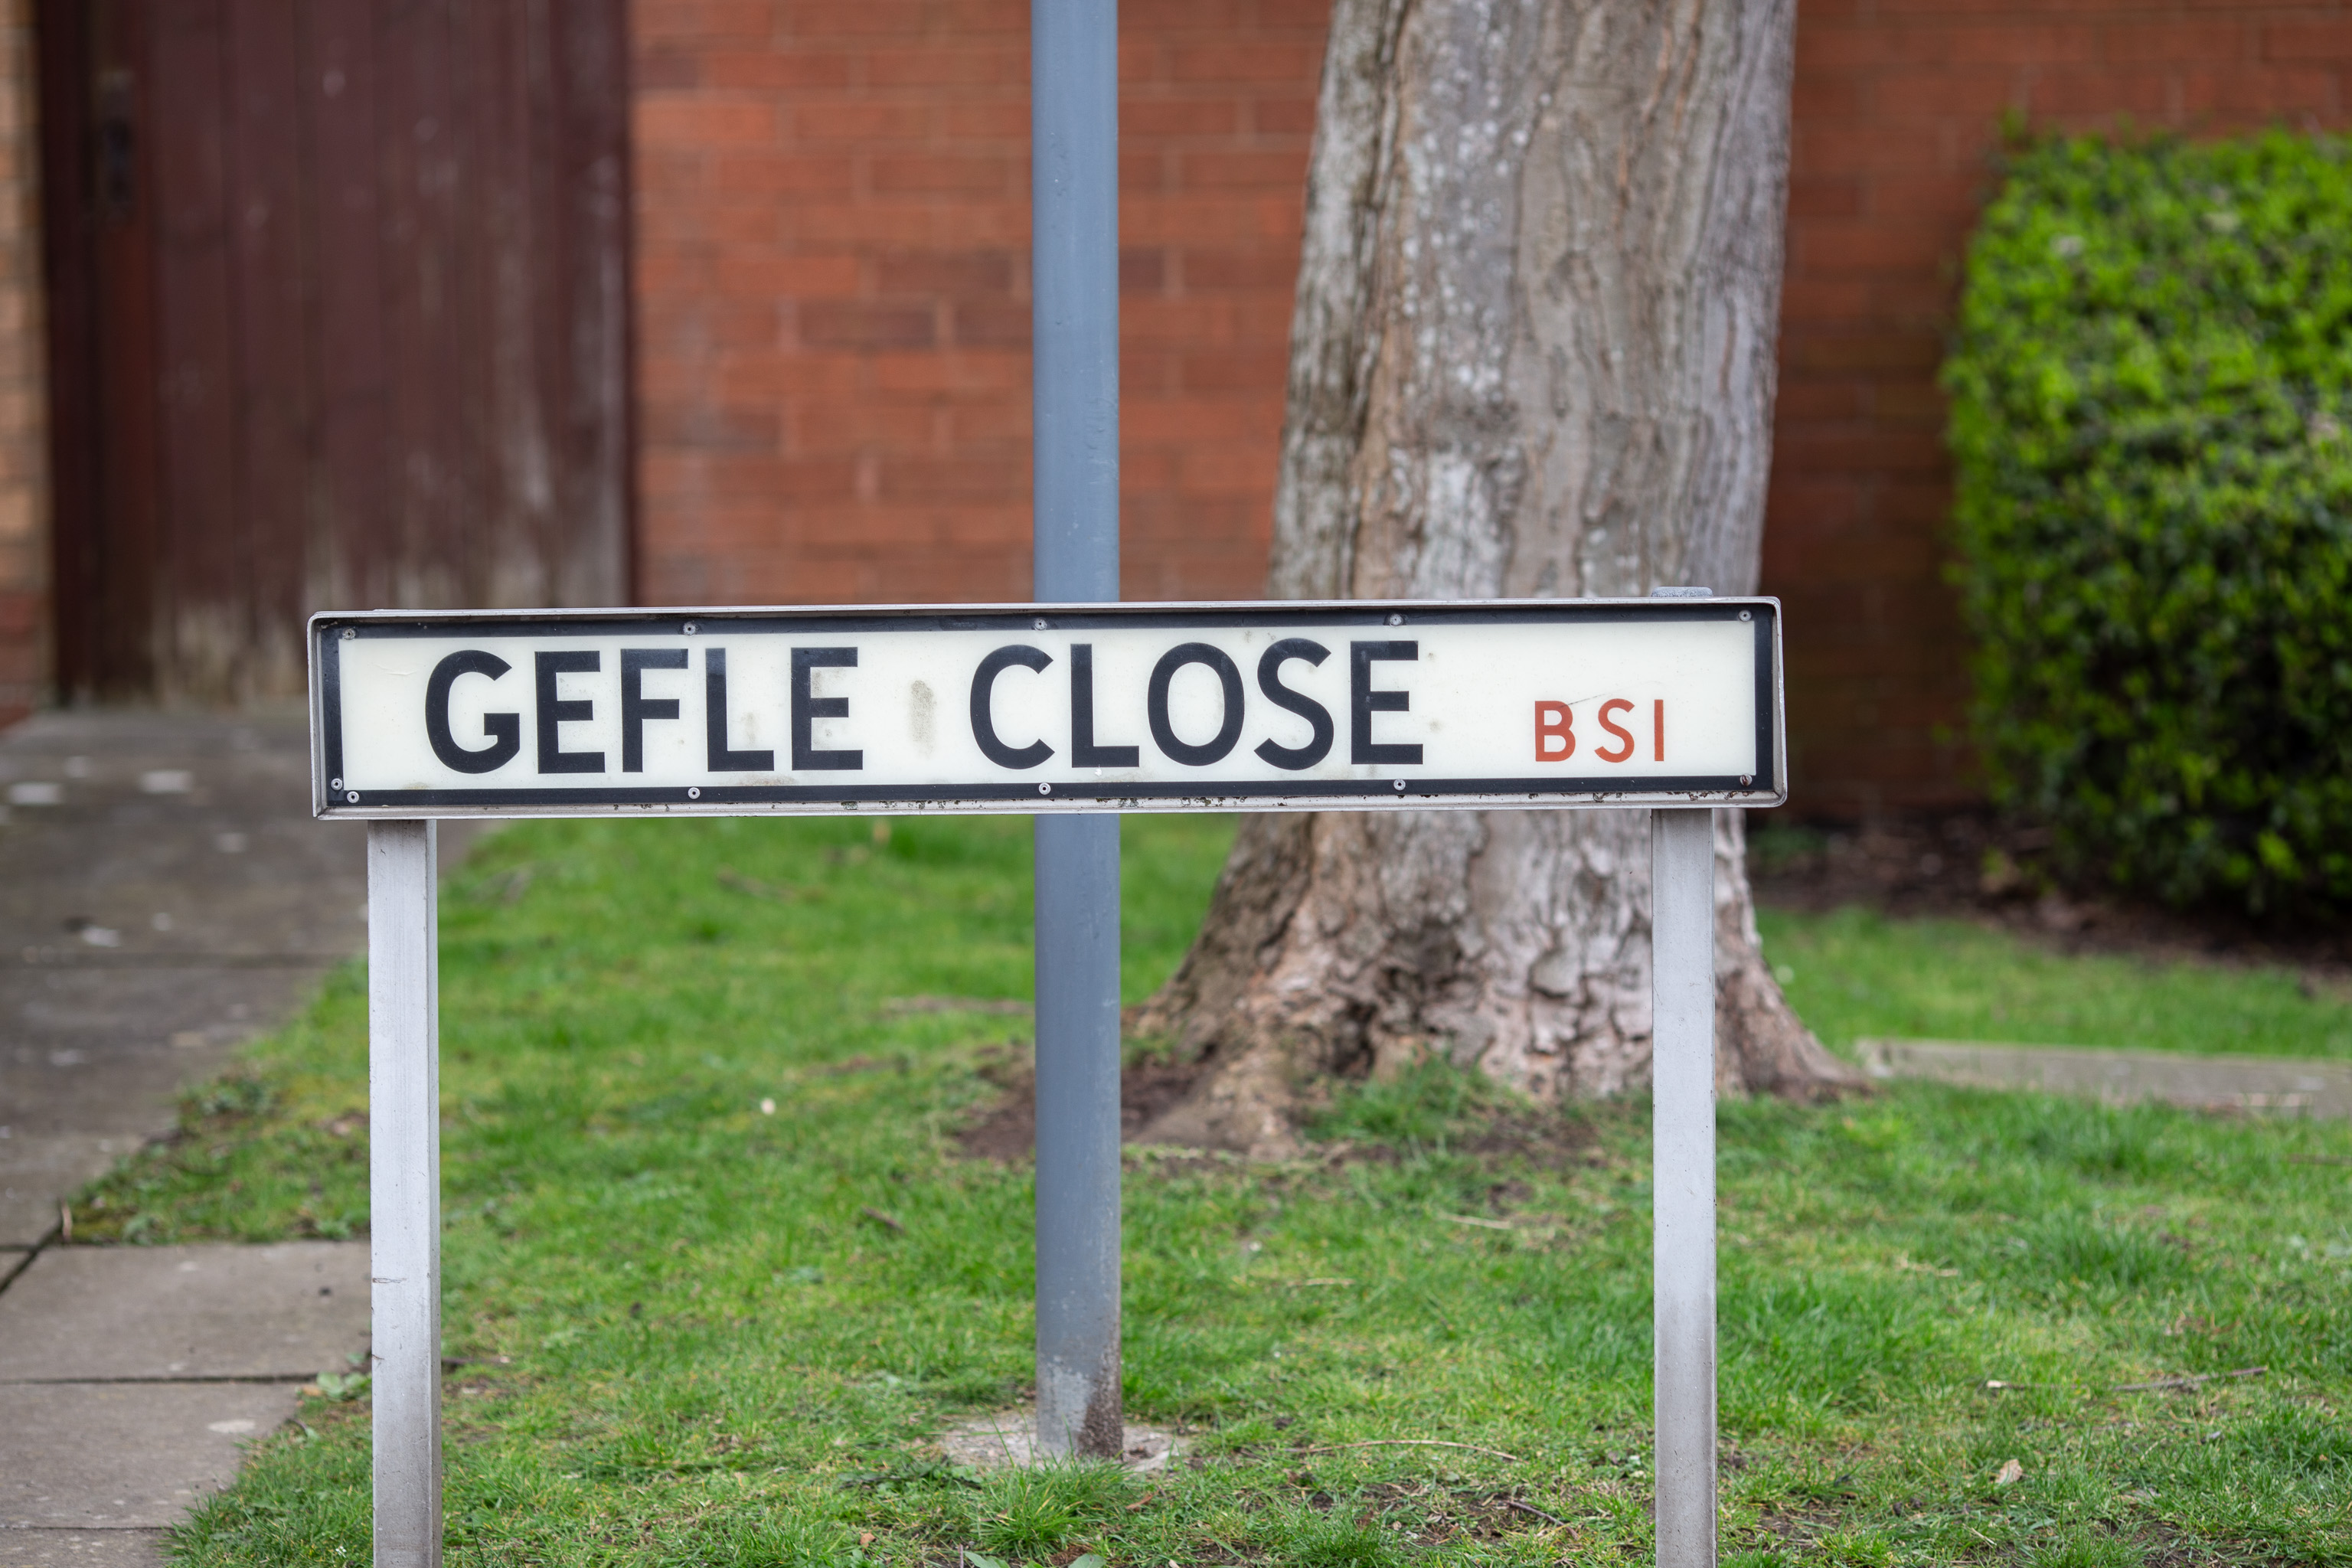 GEFLE CLOSE
I lived near here when I first moved to Bristol in the mid-1990s. I never had to say the name of the street out loud, but it always reminded me of...